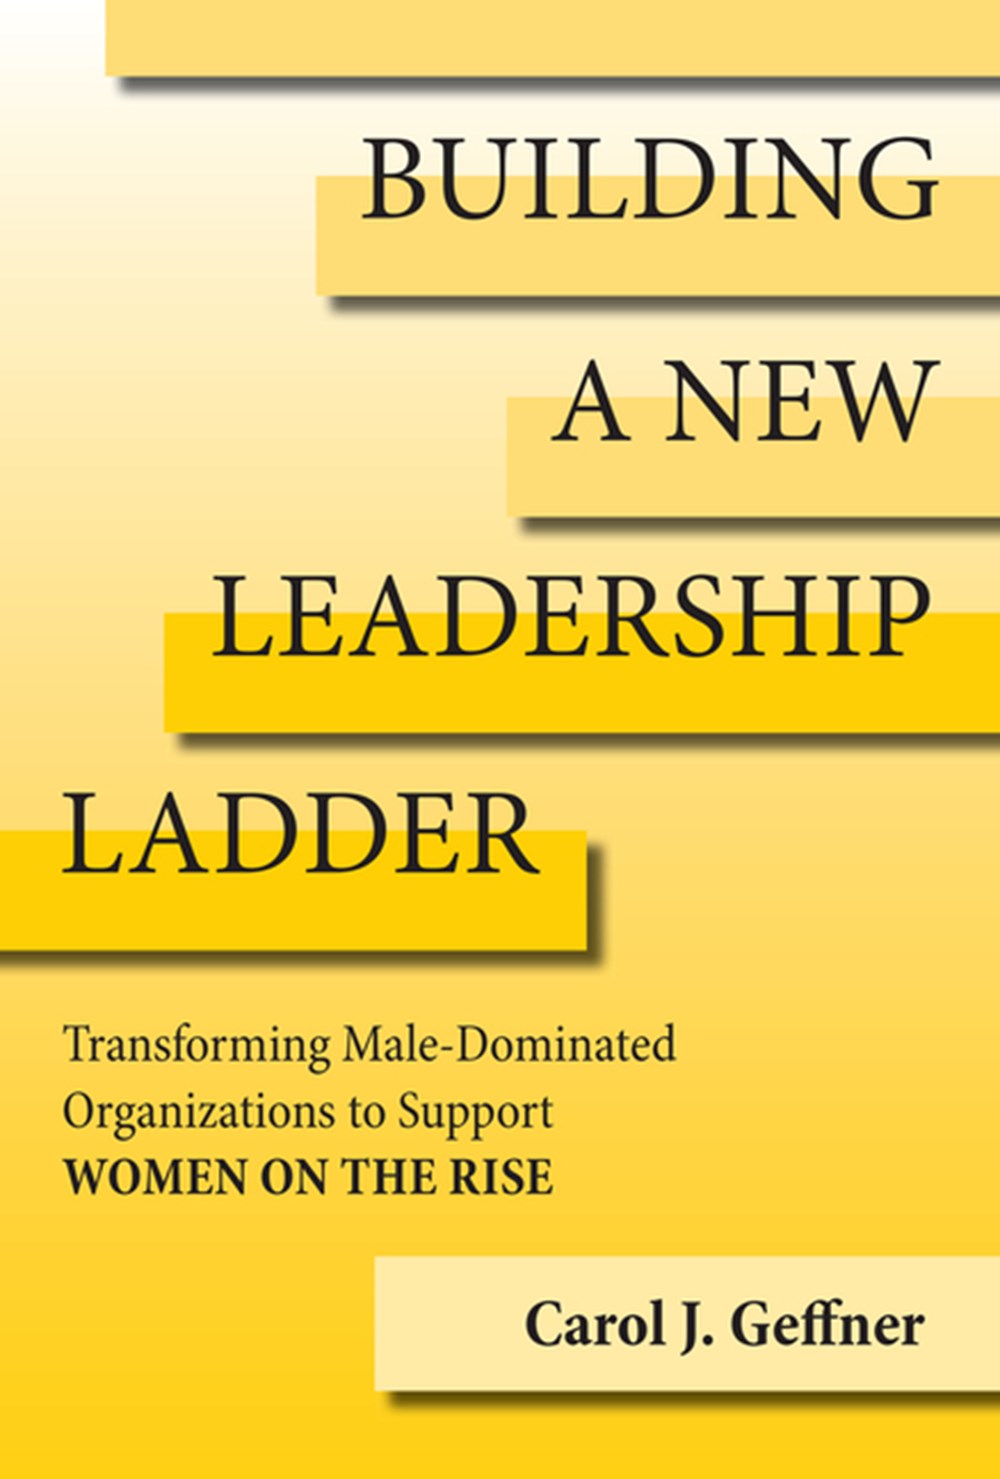 Building a New Leadership Ladder: Transforming Male-Dominated Organizations to Support Women on the 